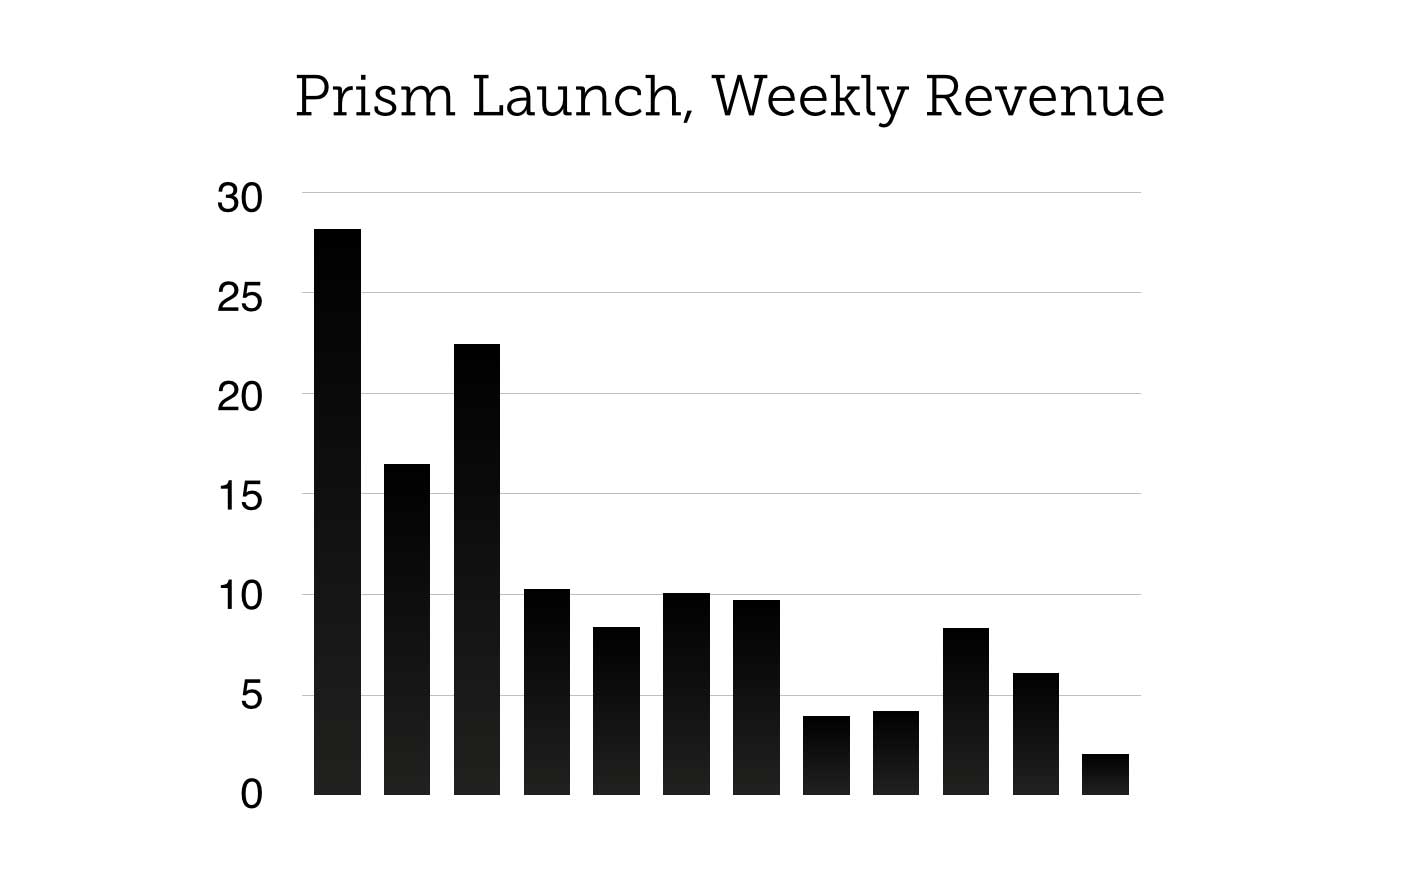 Bar graph showing Prism's weekly revenue slowly declining